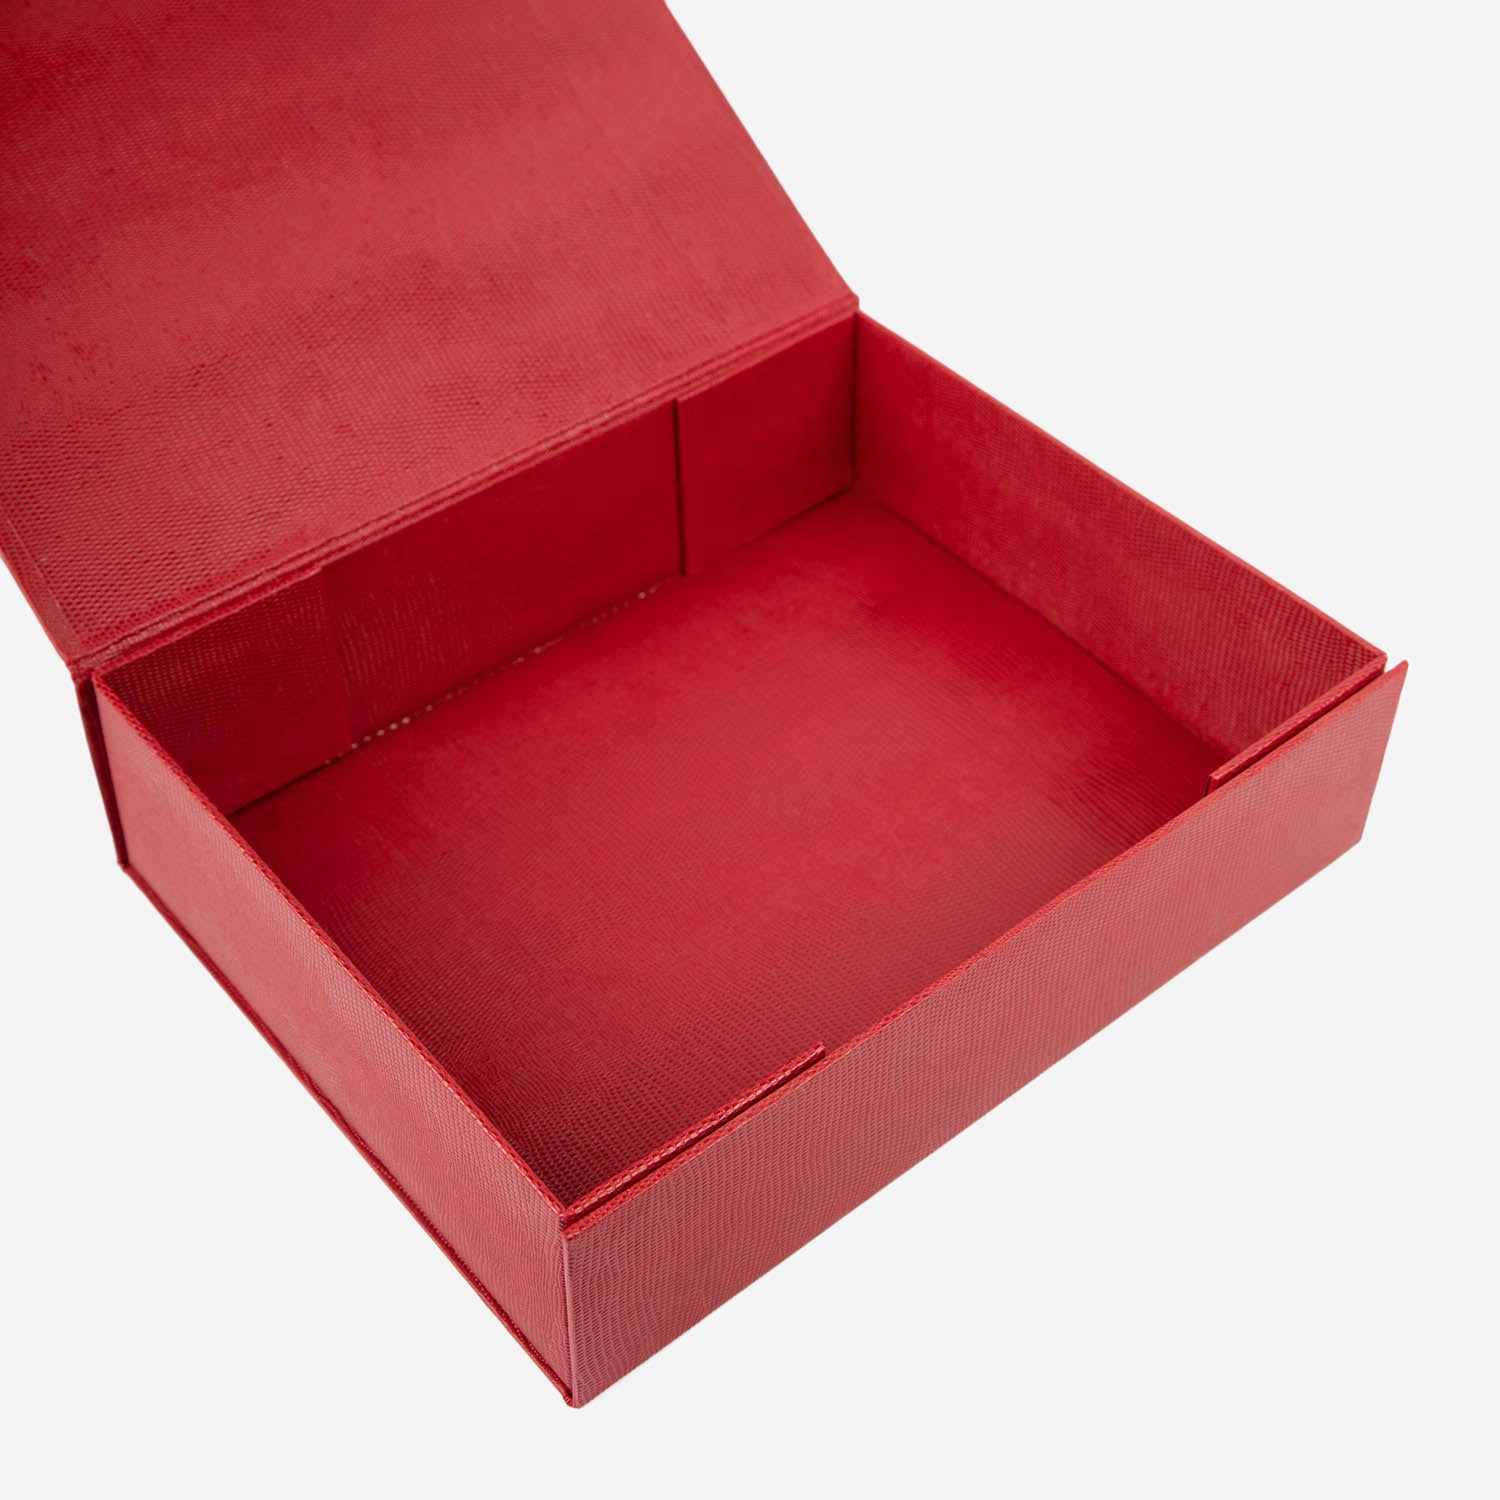 Maroon Textured Paper Gift Box